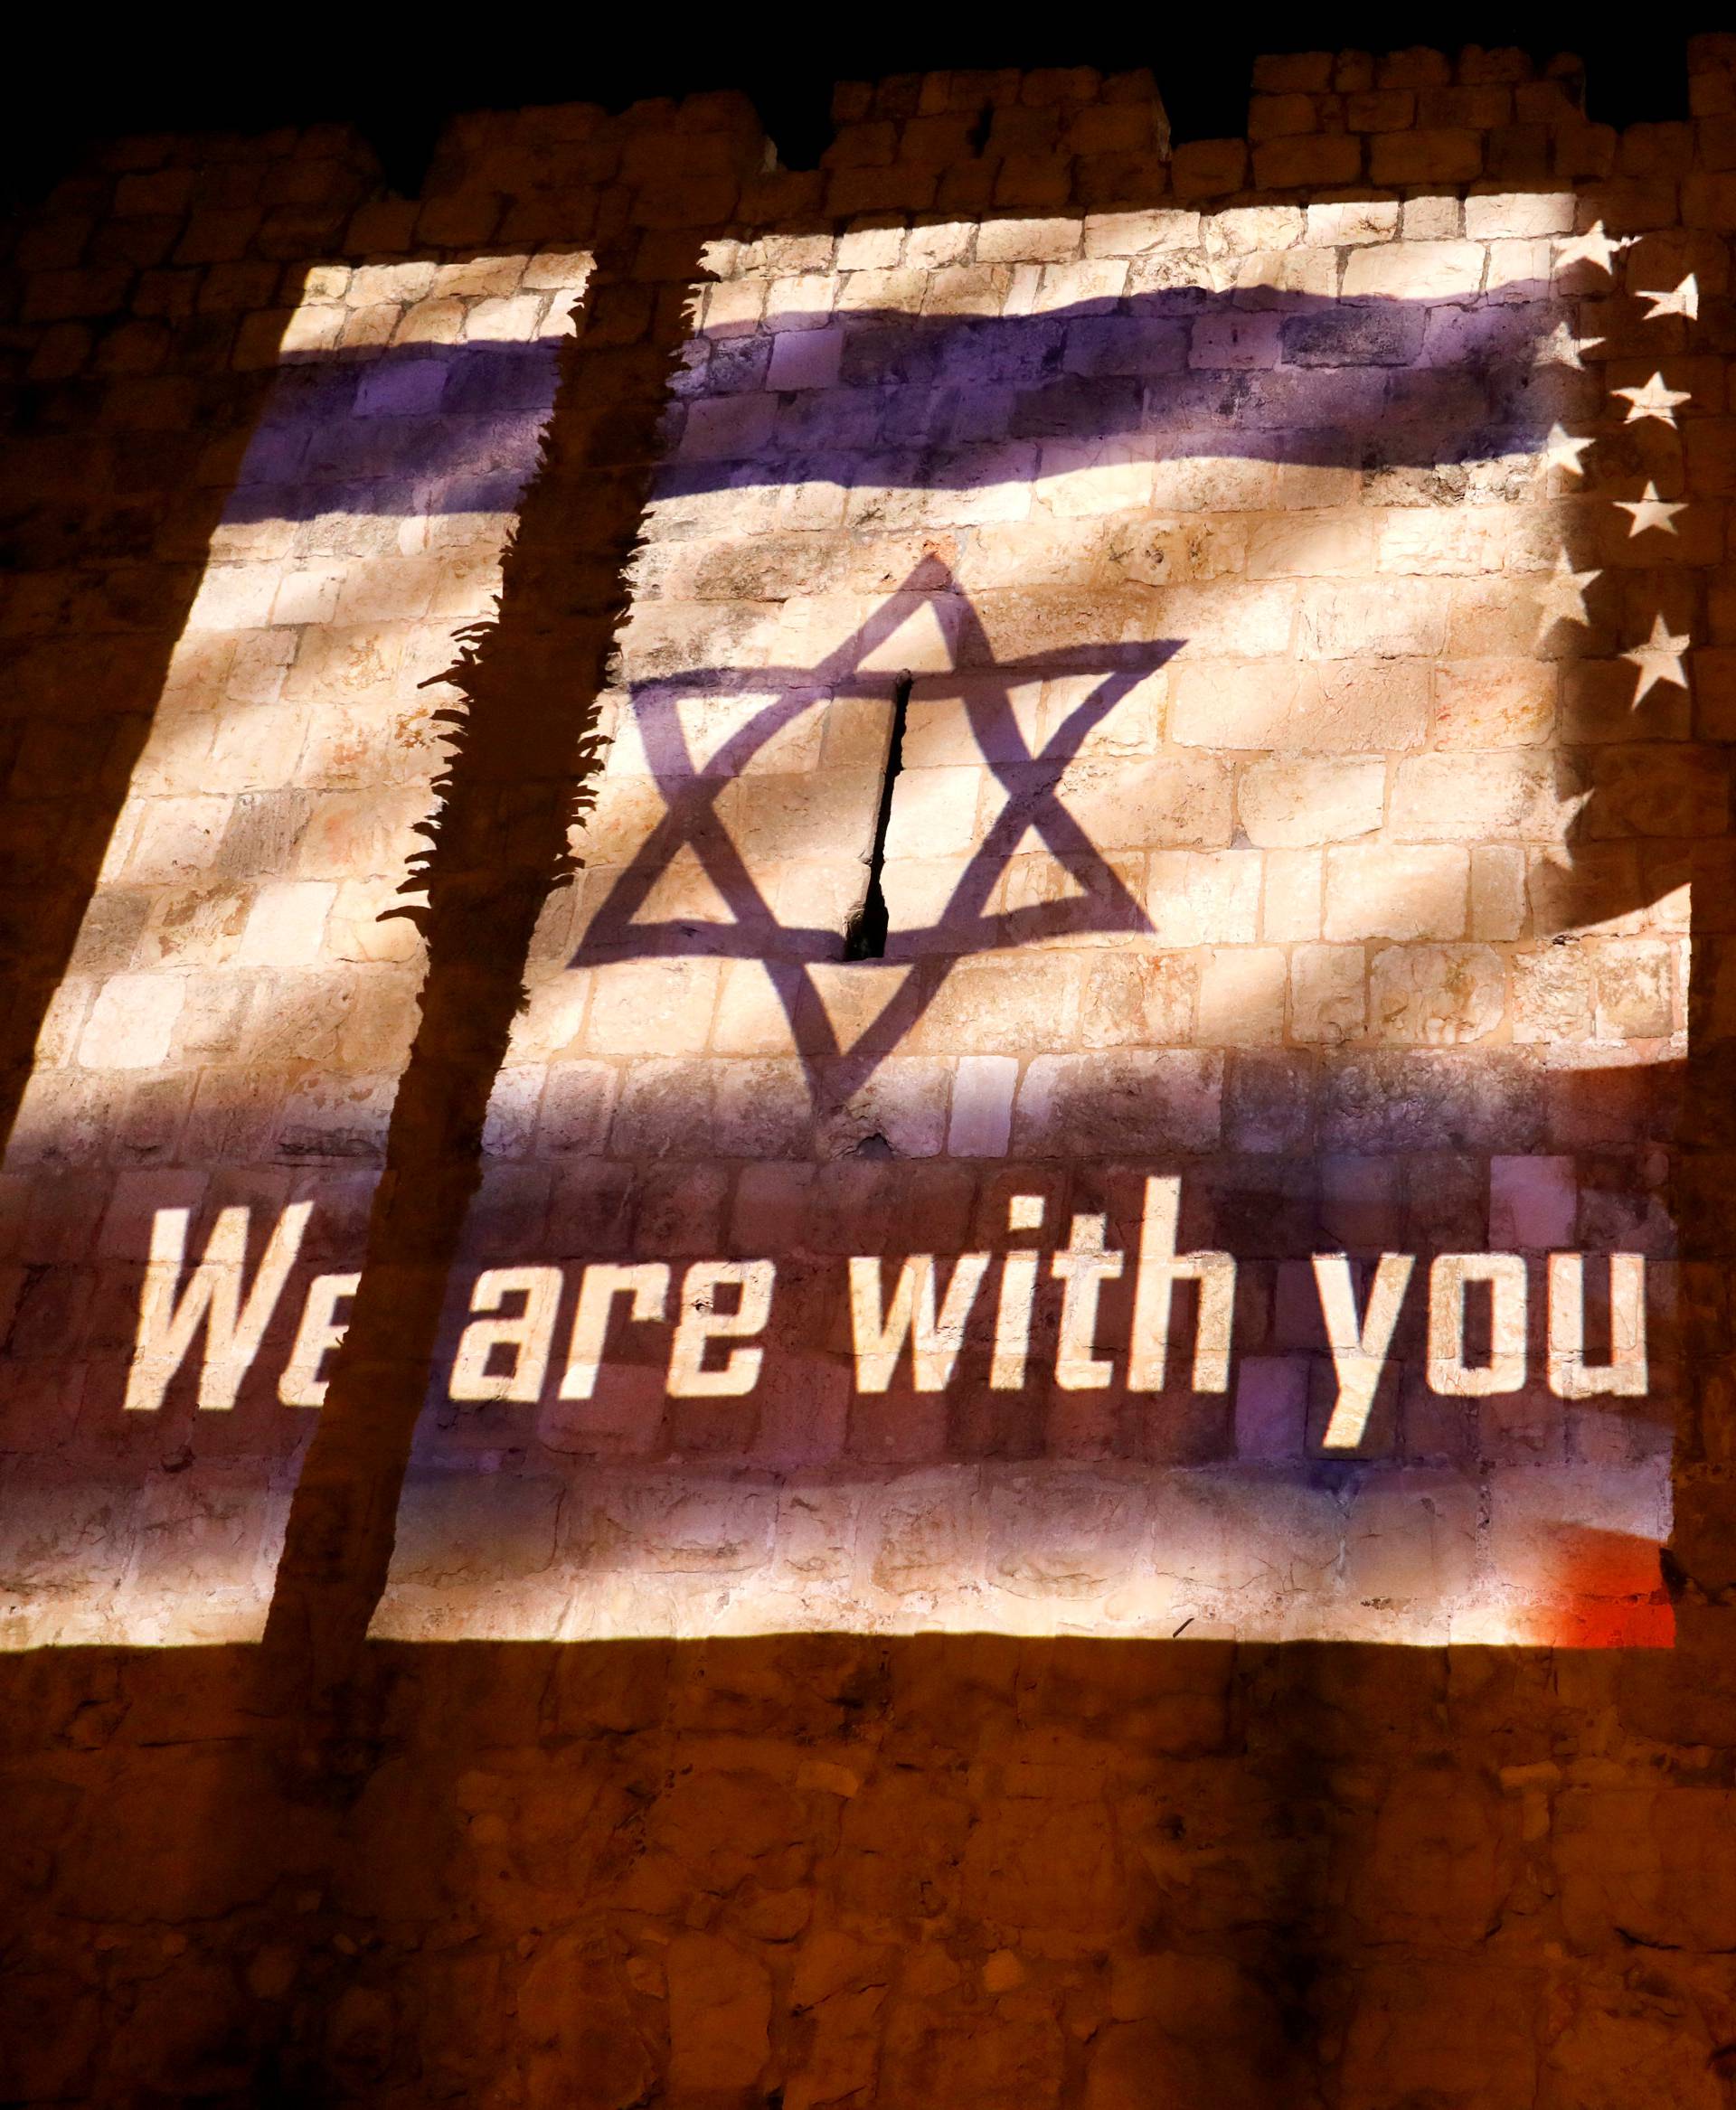 An image of Israeli and American flags with the wording, "We are with you - Pittsburgh" is projected on the walls of Jerusalem's Old City, in solidarity with the victims of a synagogue shooting in Pittsburgh